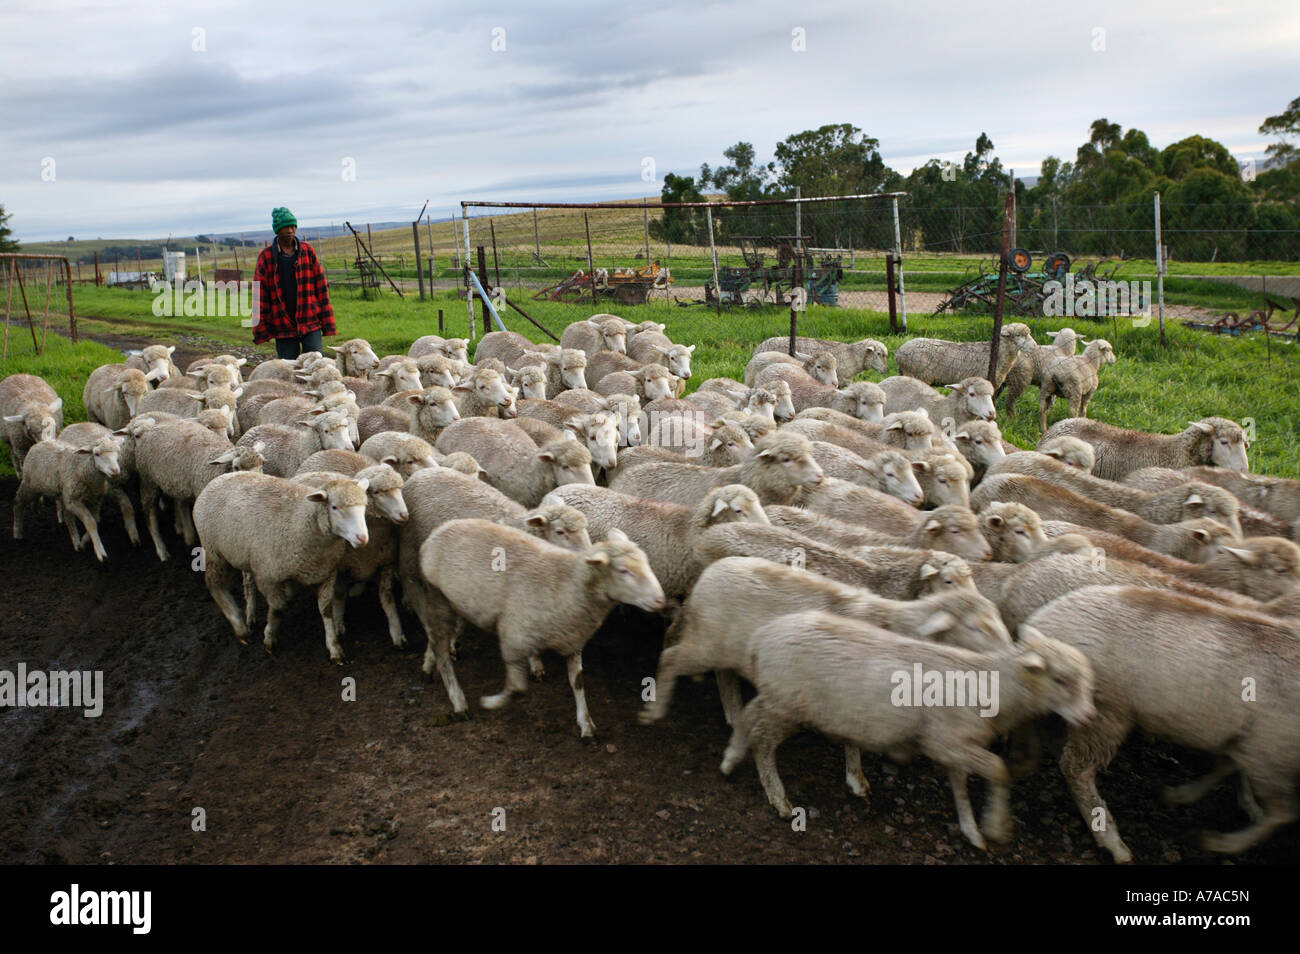 A flock of sheep being herded by a farm worker Bethlehem South Africa Stock Photo